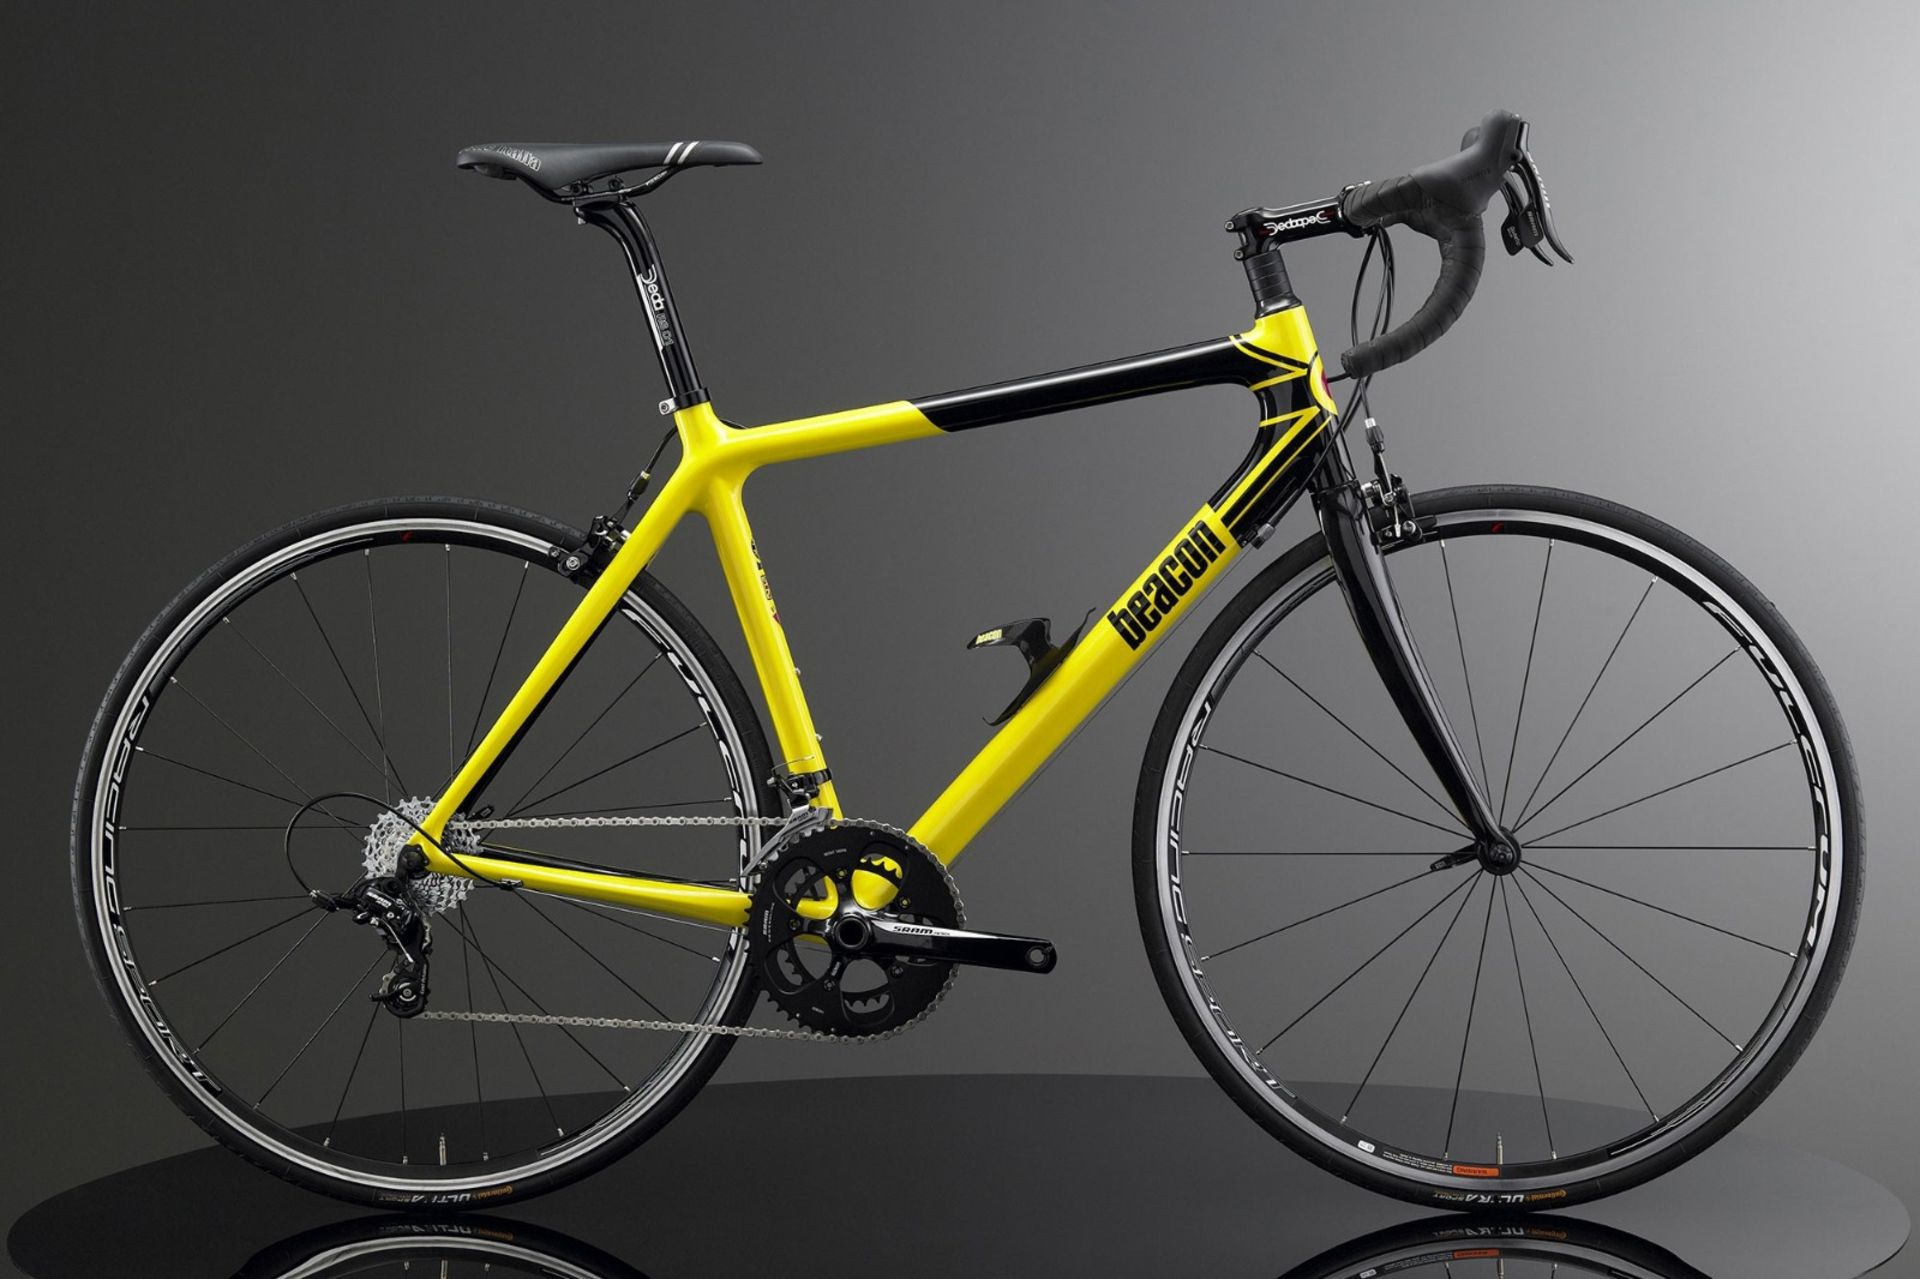 1 x Beacon Model BF-60, Size 430, Carbon Fibre Bike Frame in Yellow & Black. - Image 2 of 3